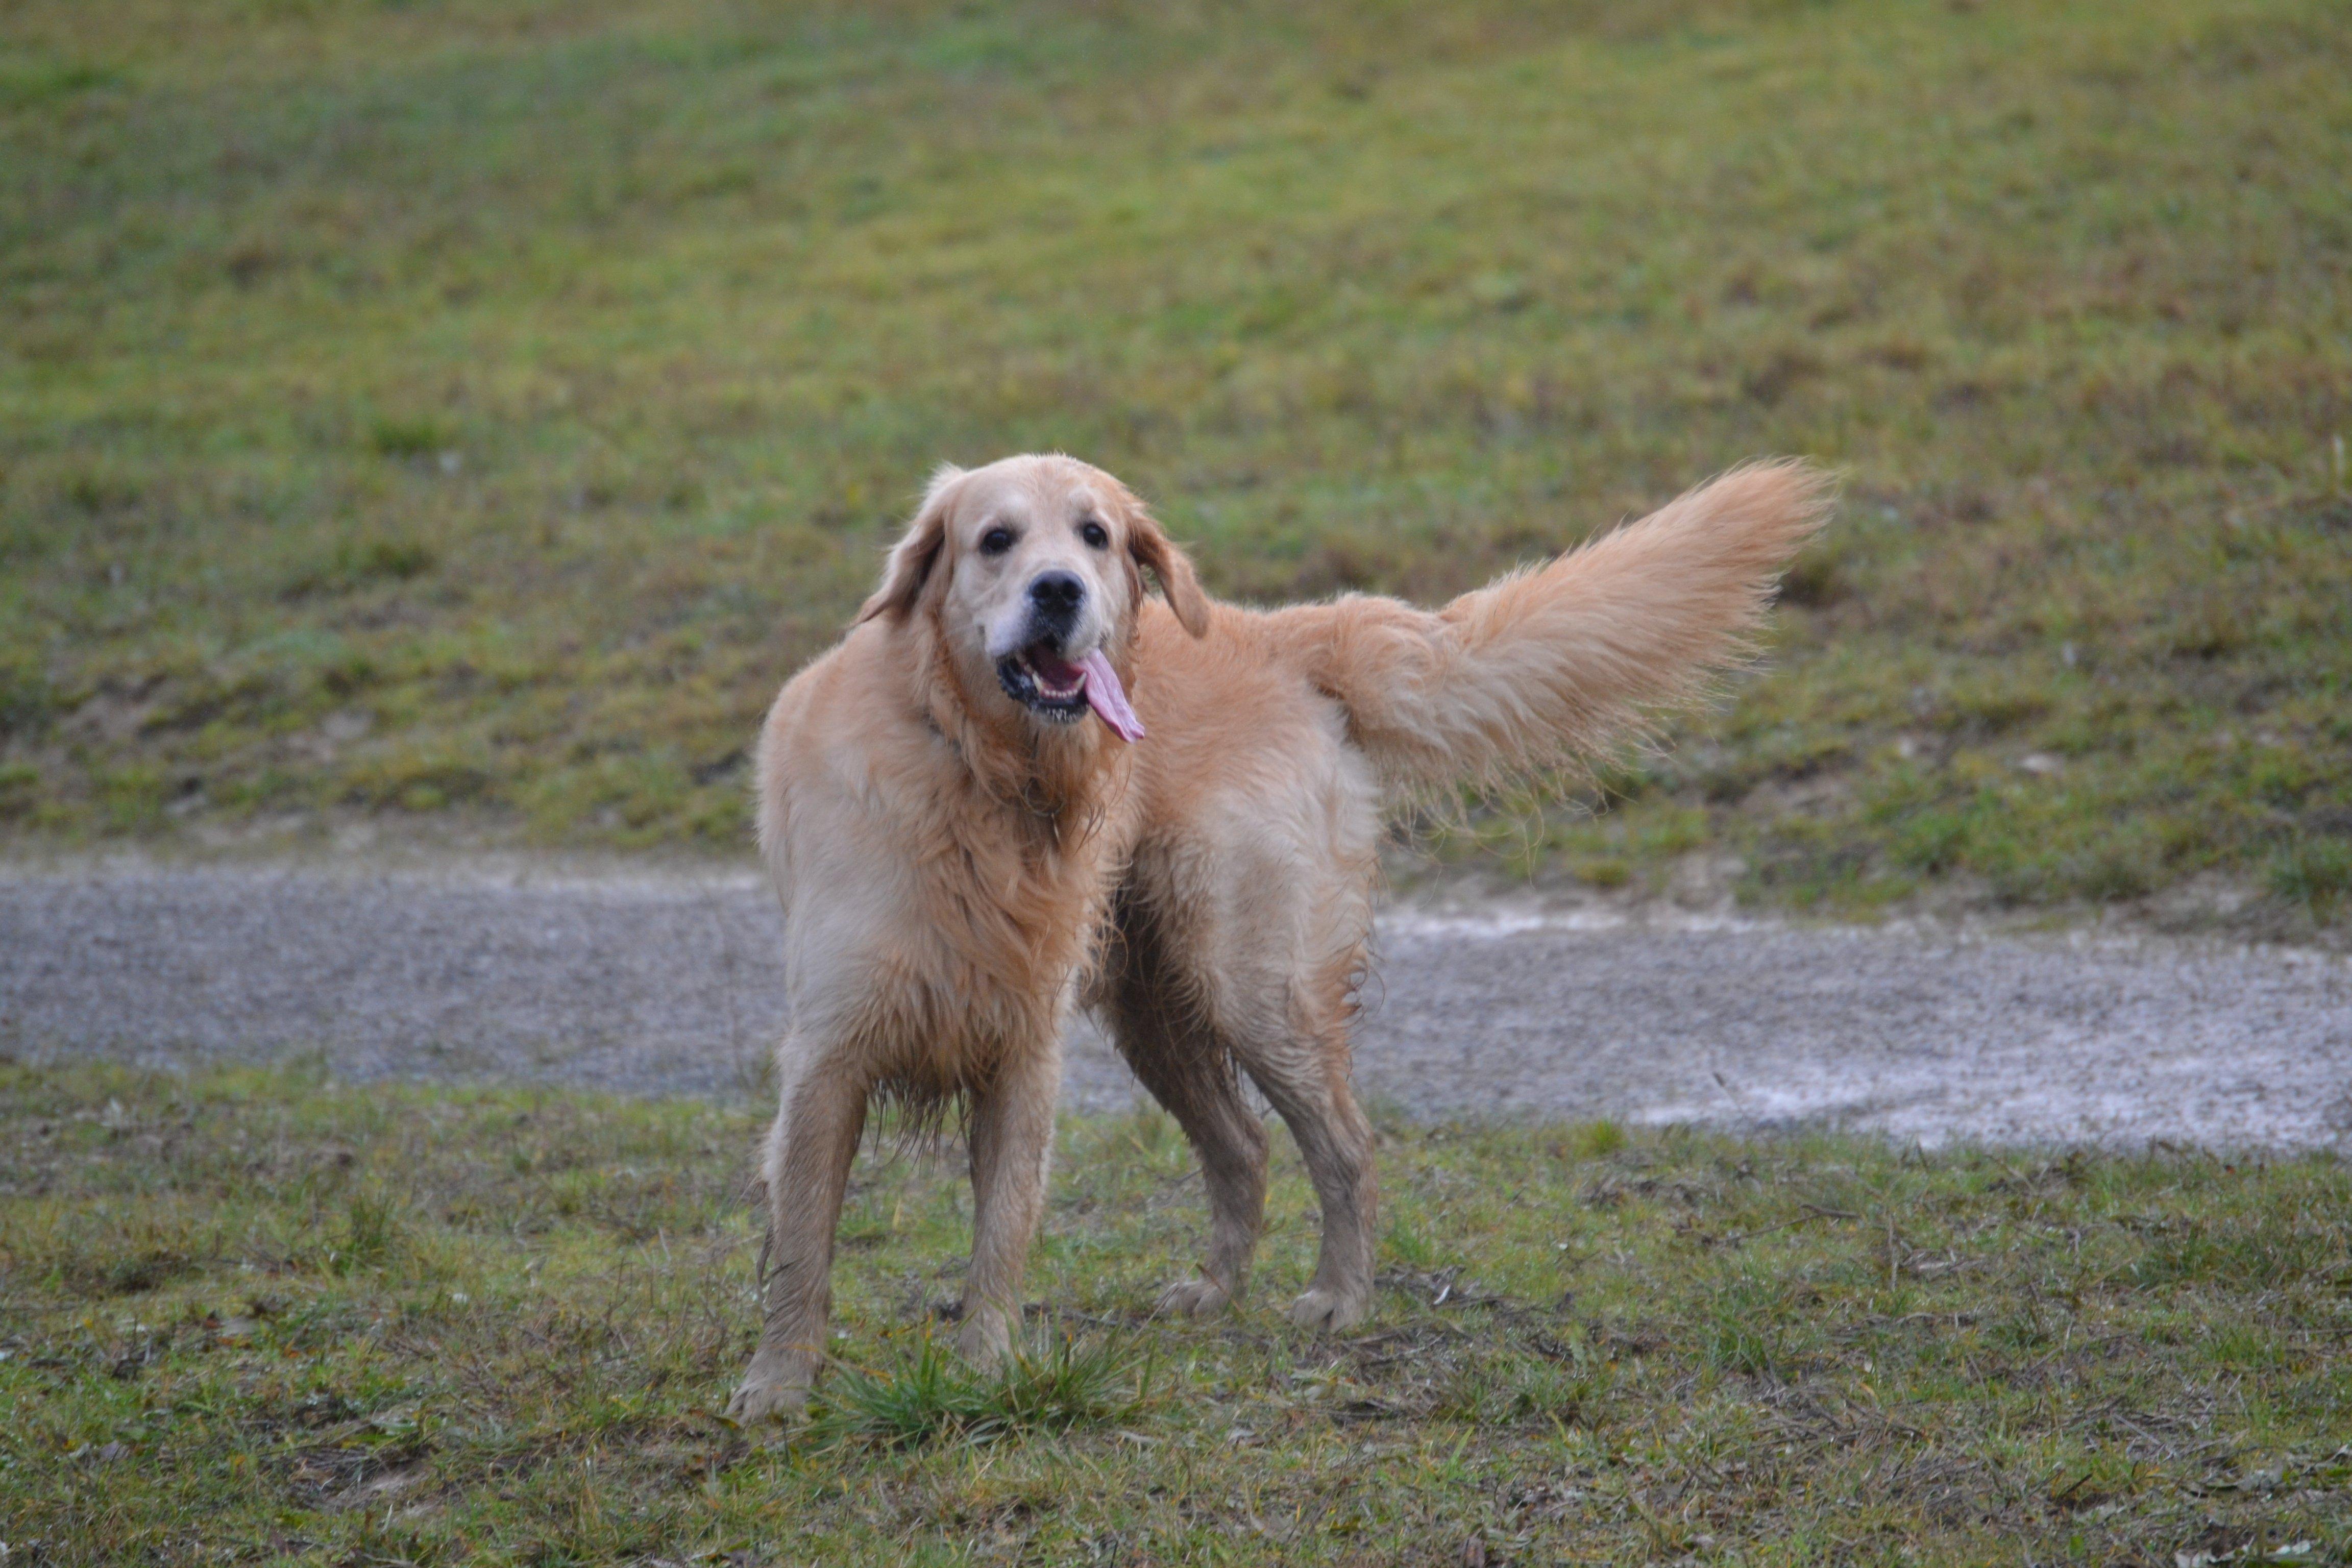 A golden retriever enjoying its time at Horsted Green Park this weekend, photo courtesy of Millie Goad